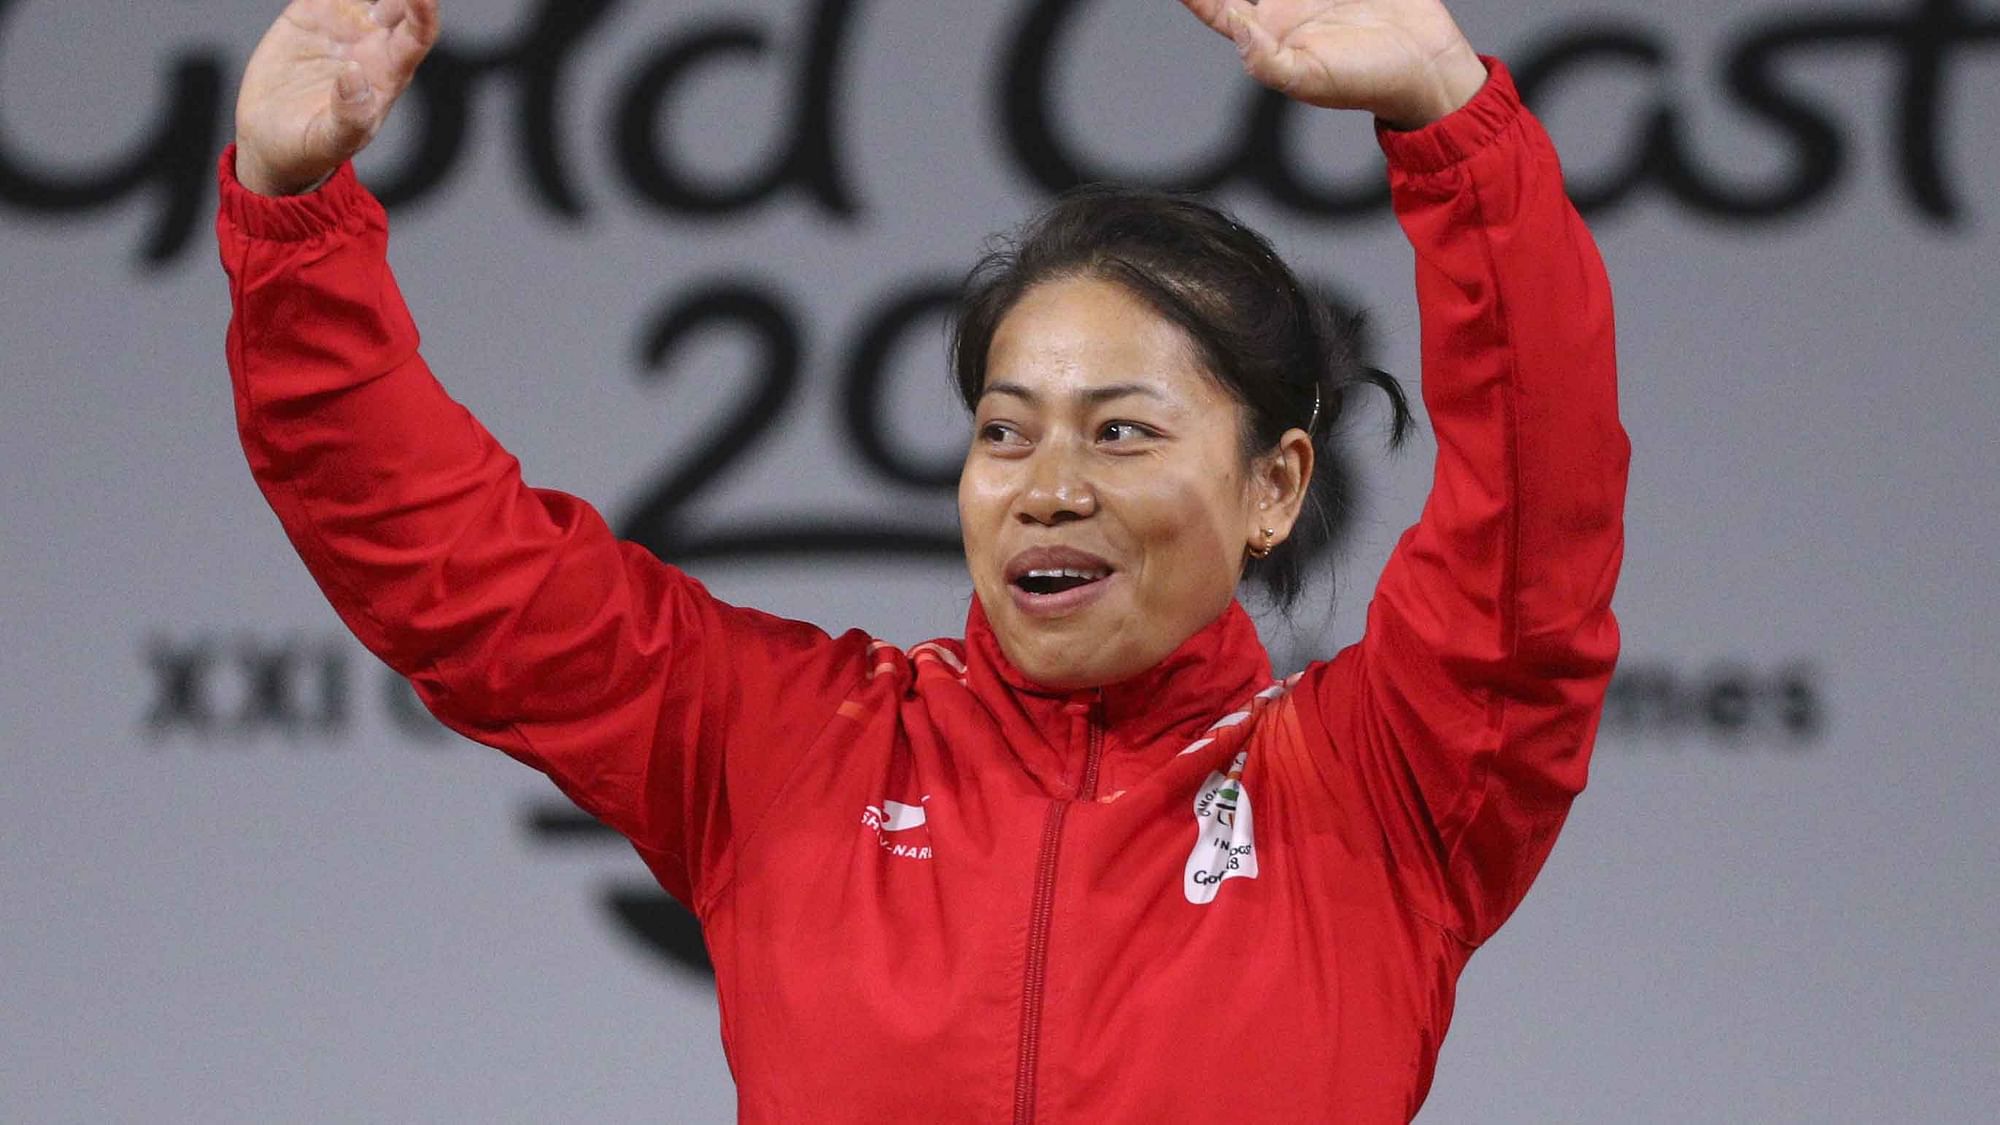 Indian weightlifter Sanjita Chanu’s doping ban was provisionally lifted by the world body on Wednesday, 23 January